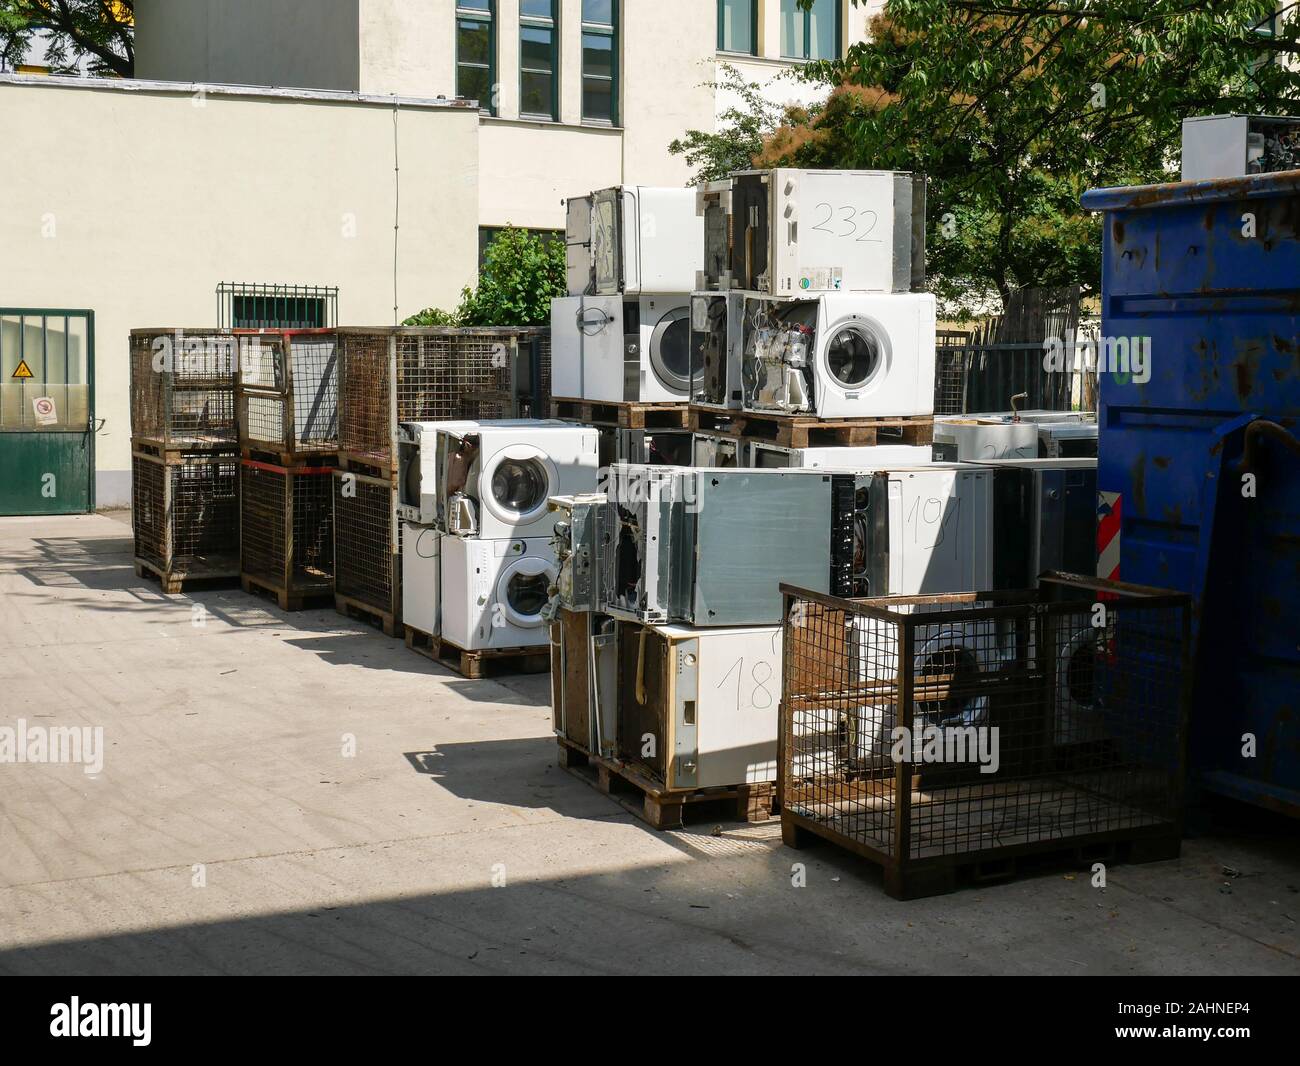 Wien/Austria - june 4 2019: discarded washing machines piled outside of a recycling and recovery compound in vienna Stock Photo